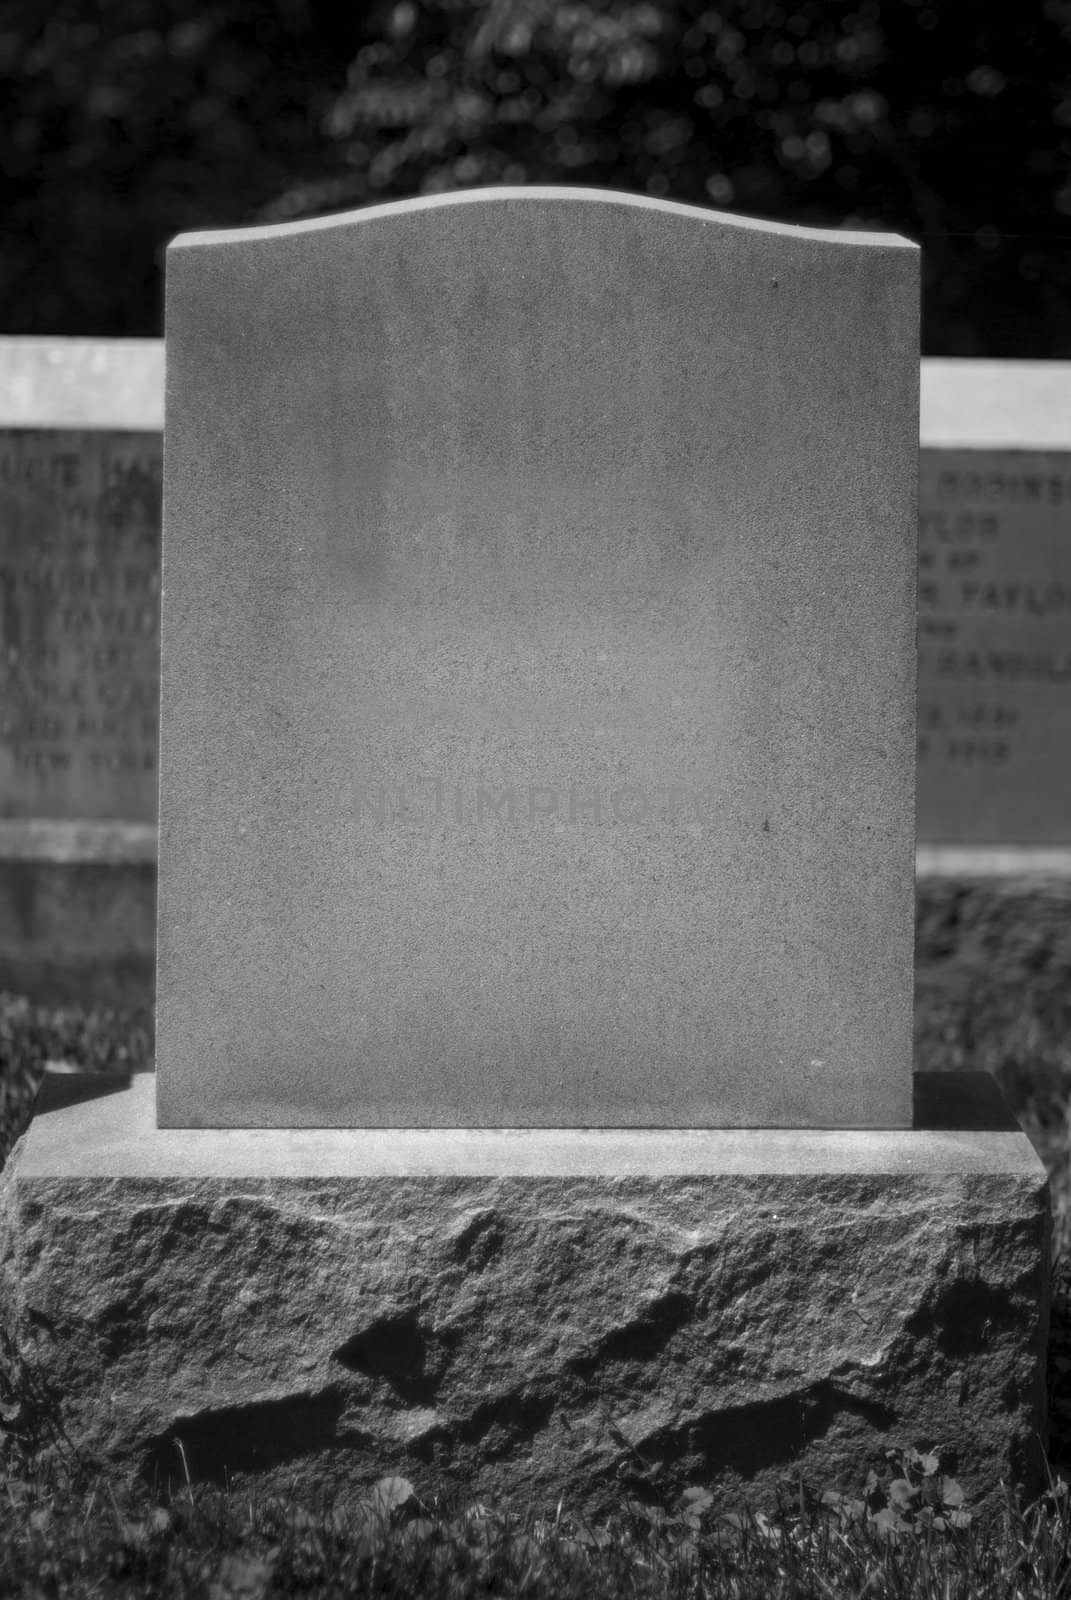 A blank tombstone stands in a cemetary